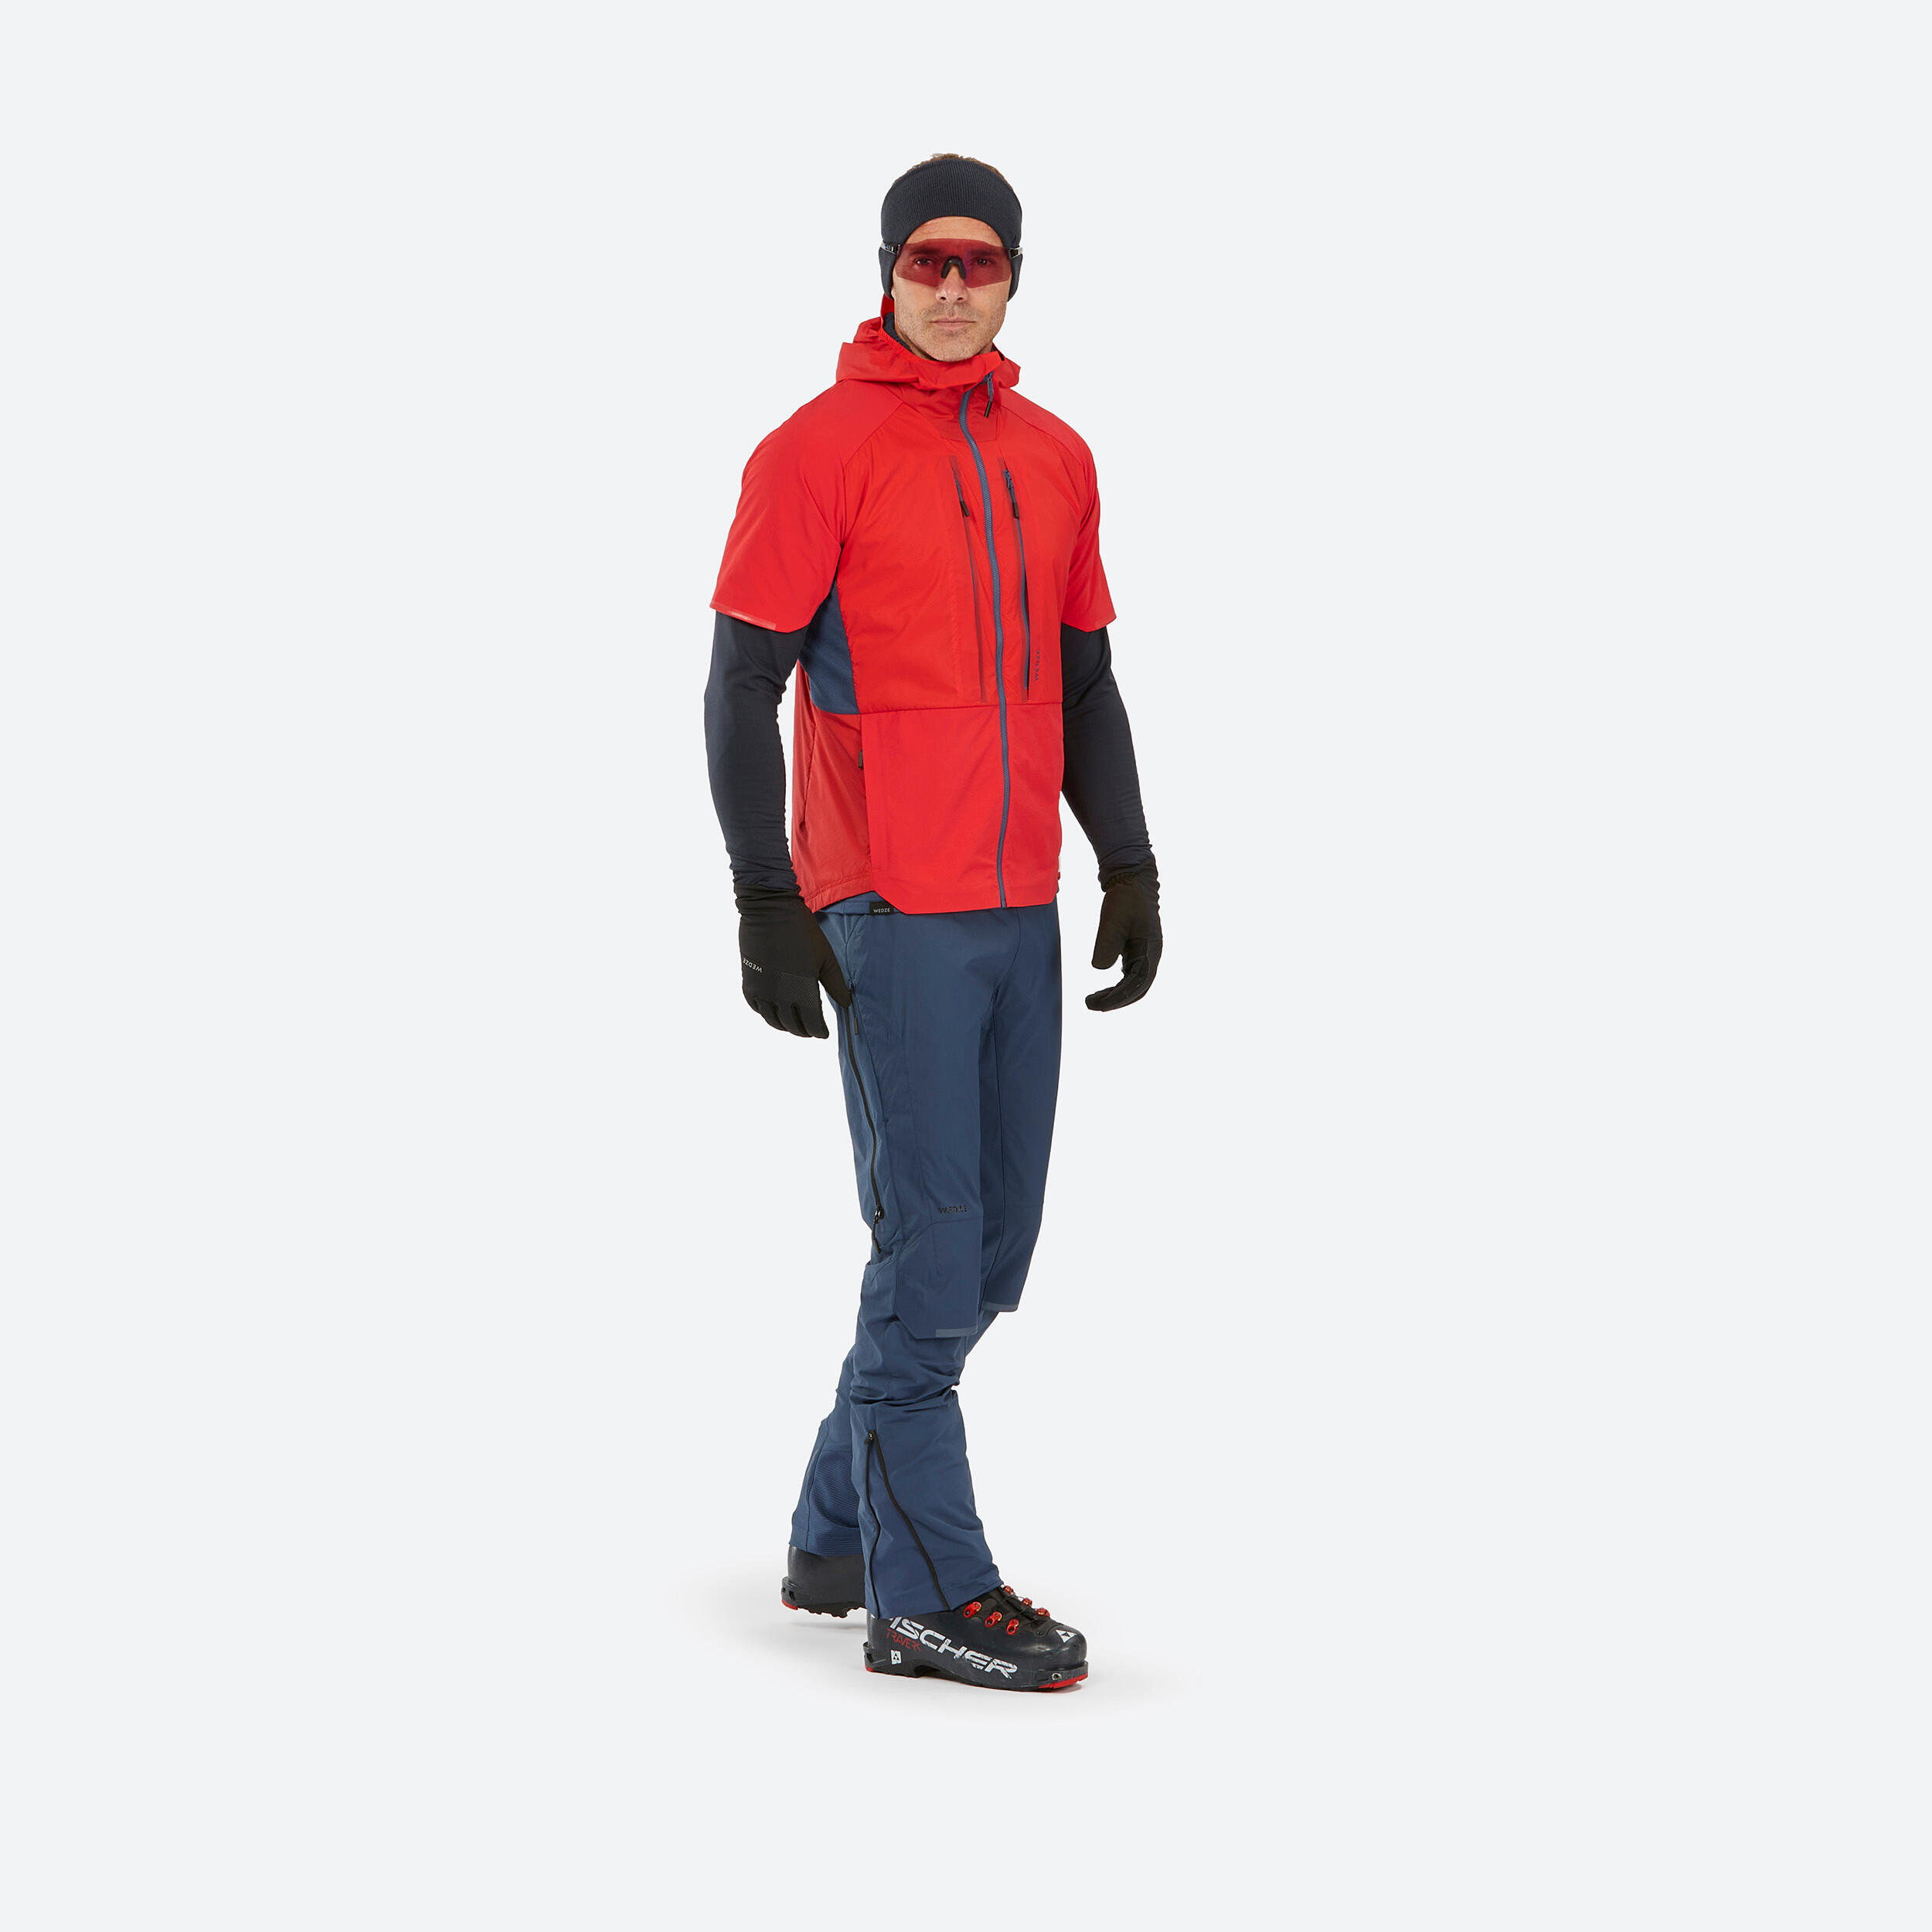 MEN'S PACER SHORT-SLEEVED CROSS COUNTRY SKI JACKET - RED AND NAVY BLUE 6/14